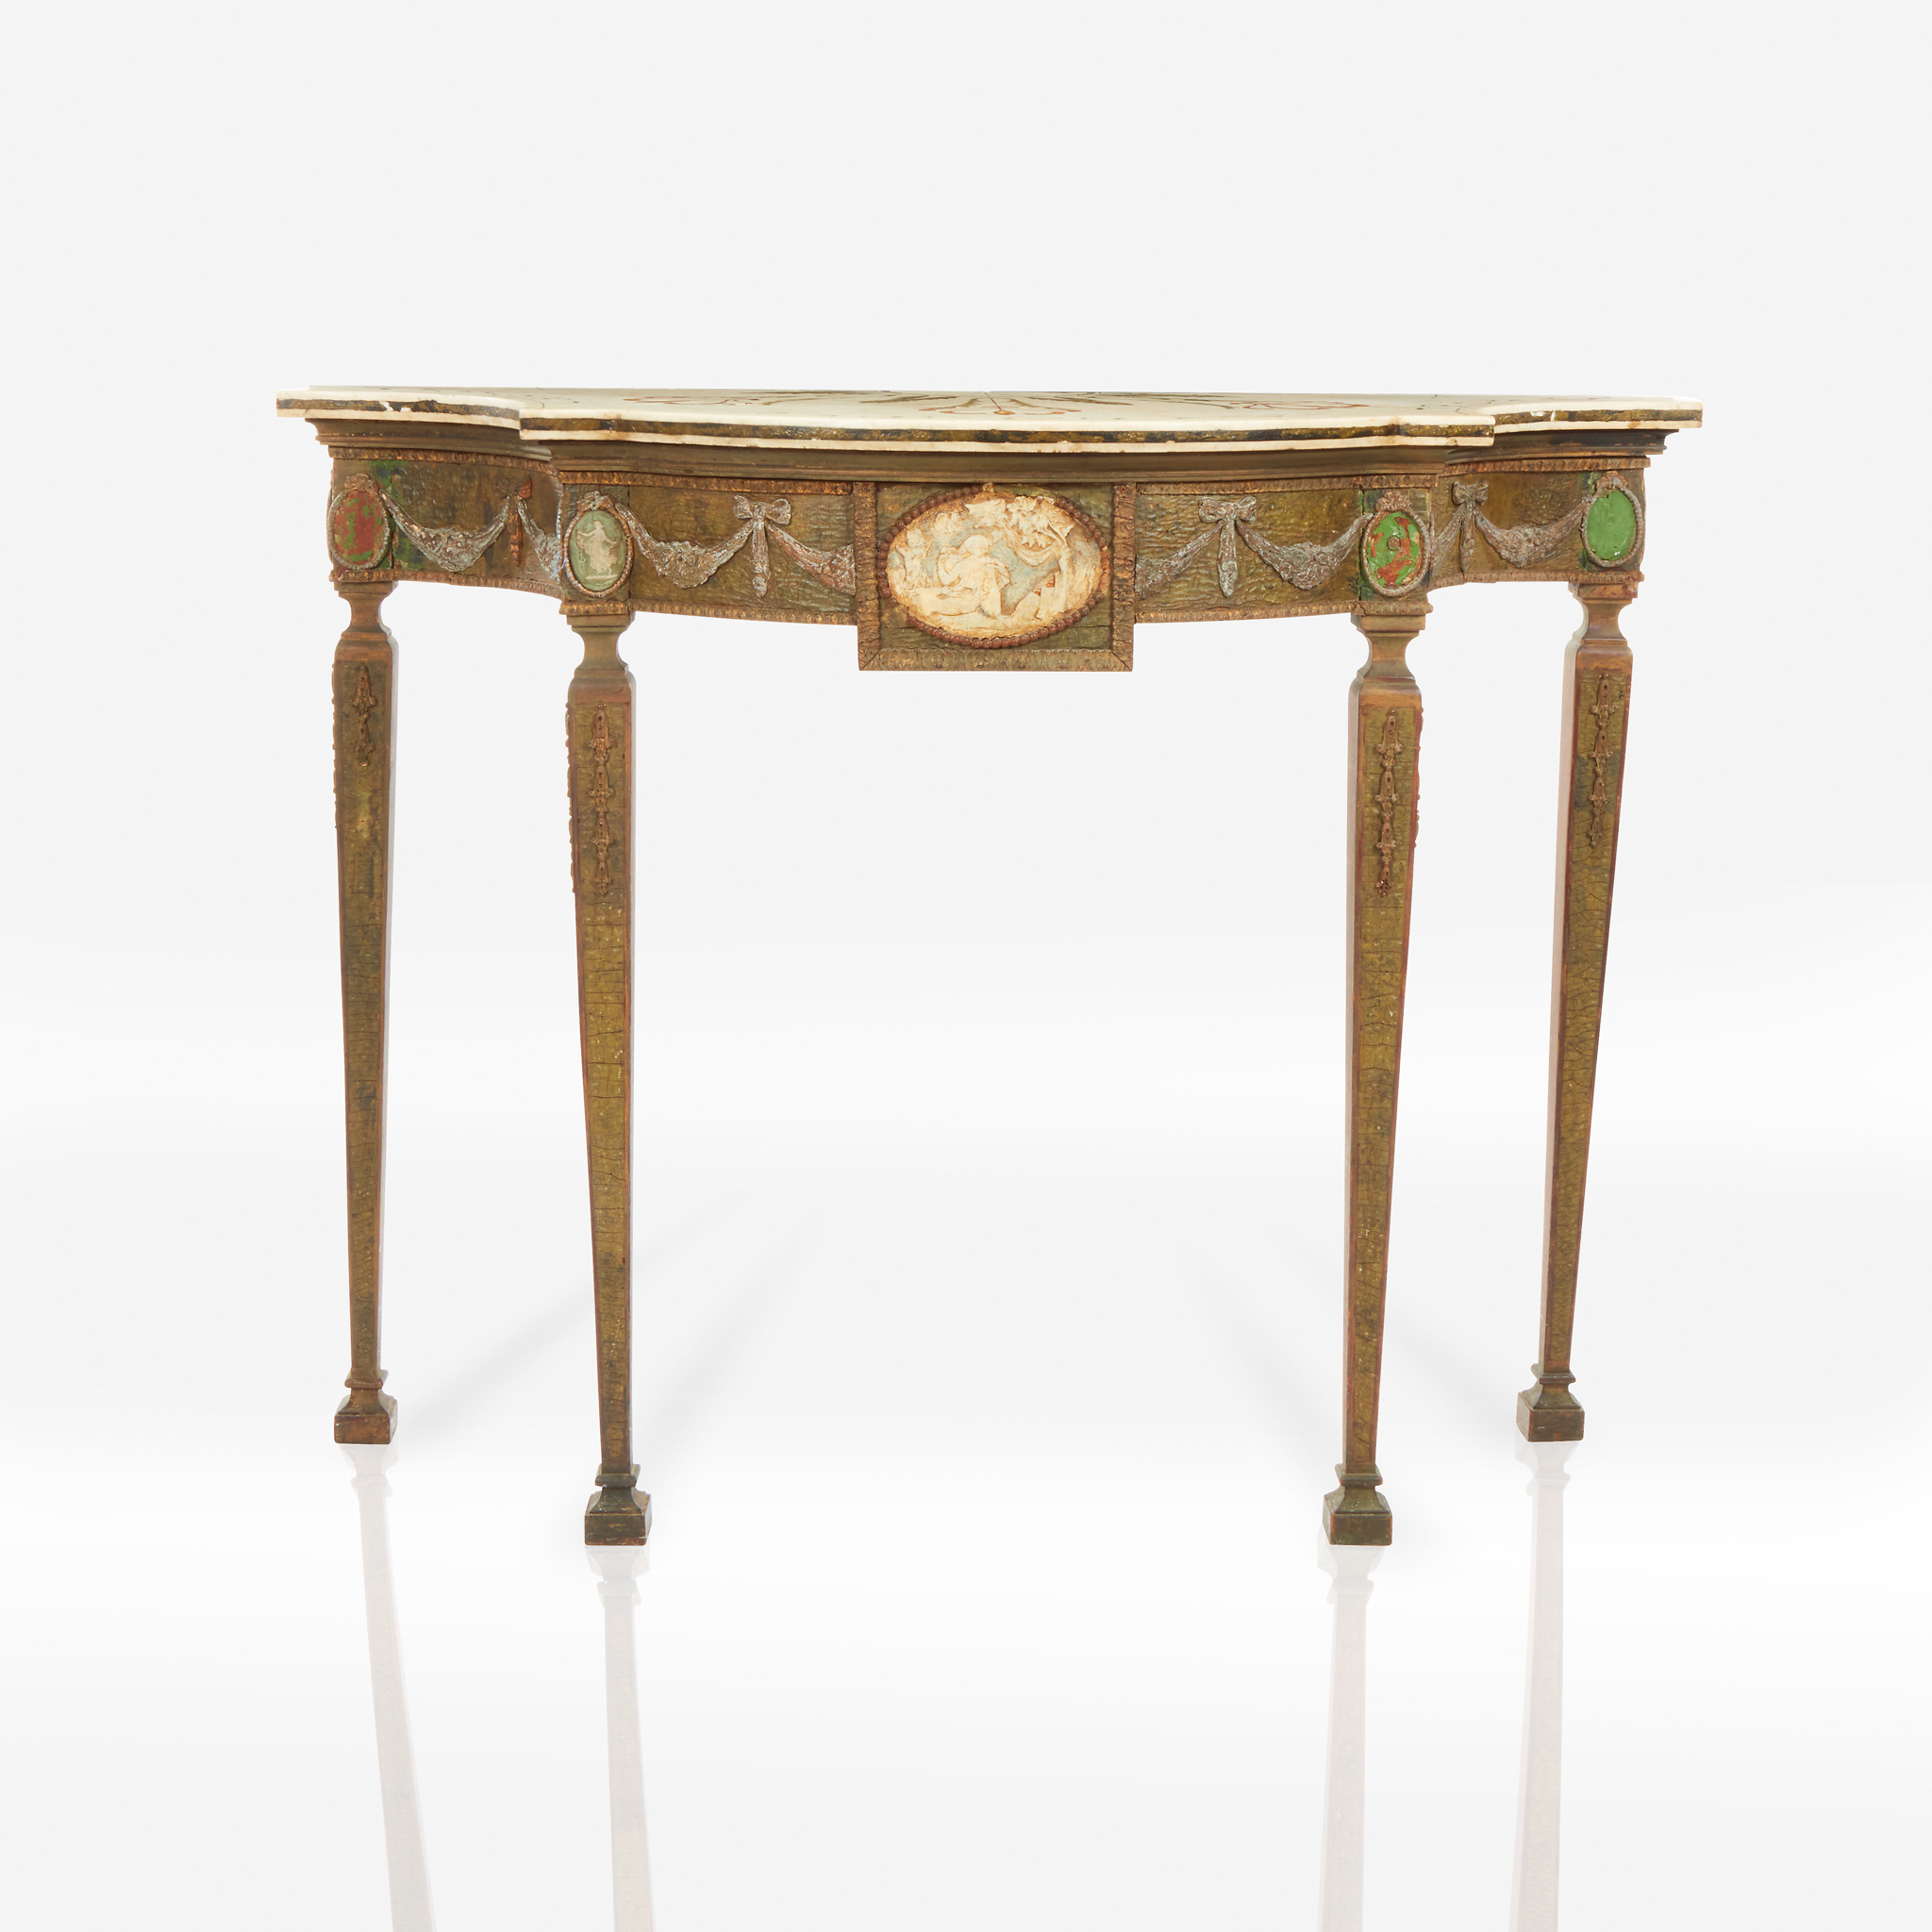 A George III Adamaesque polychrome decorated console with scagliola and white marble top, Circa 1800